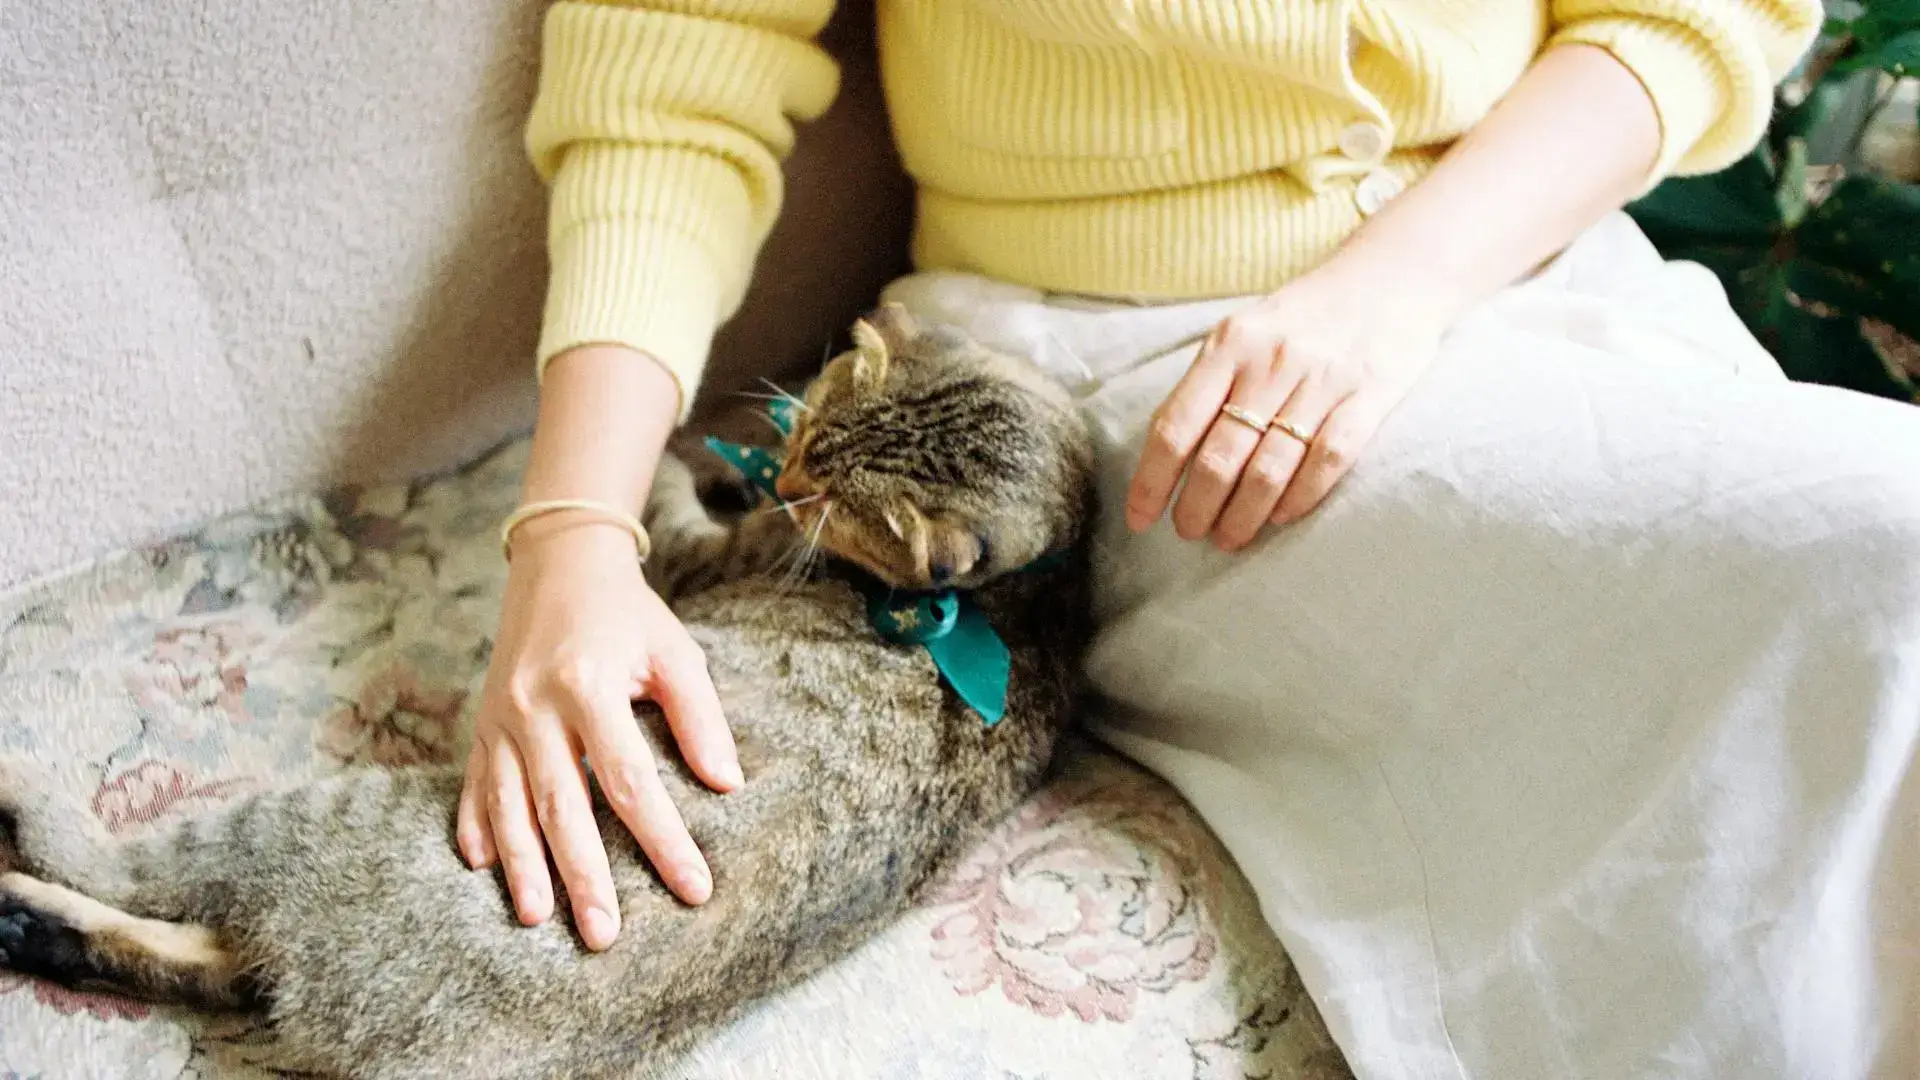 a cat lying on a person's lap